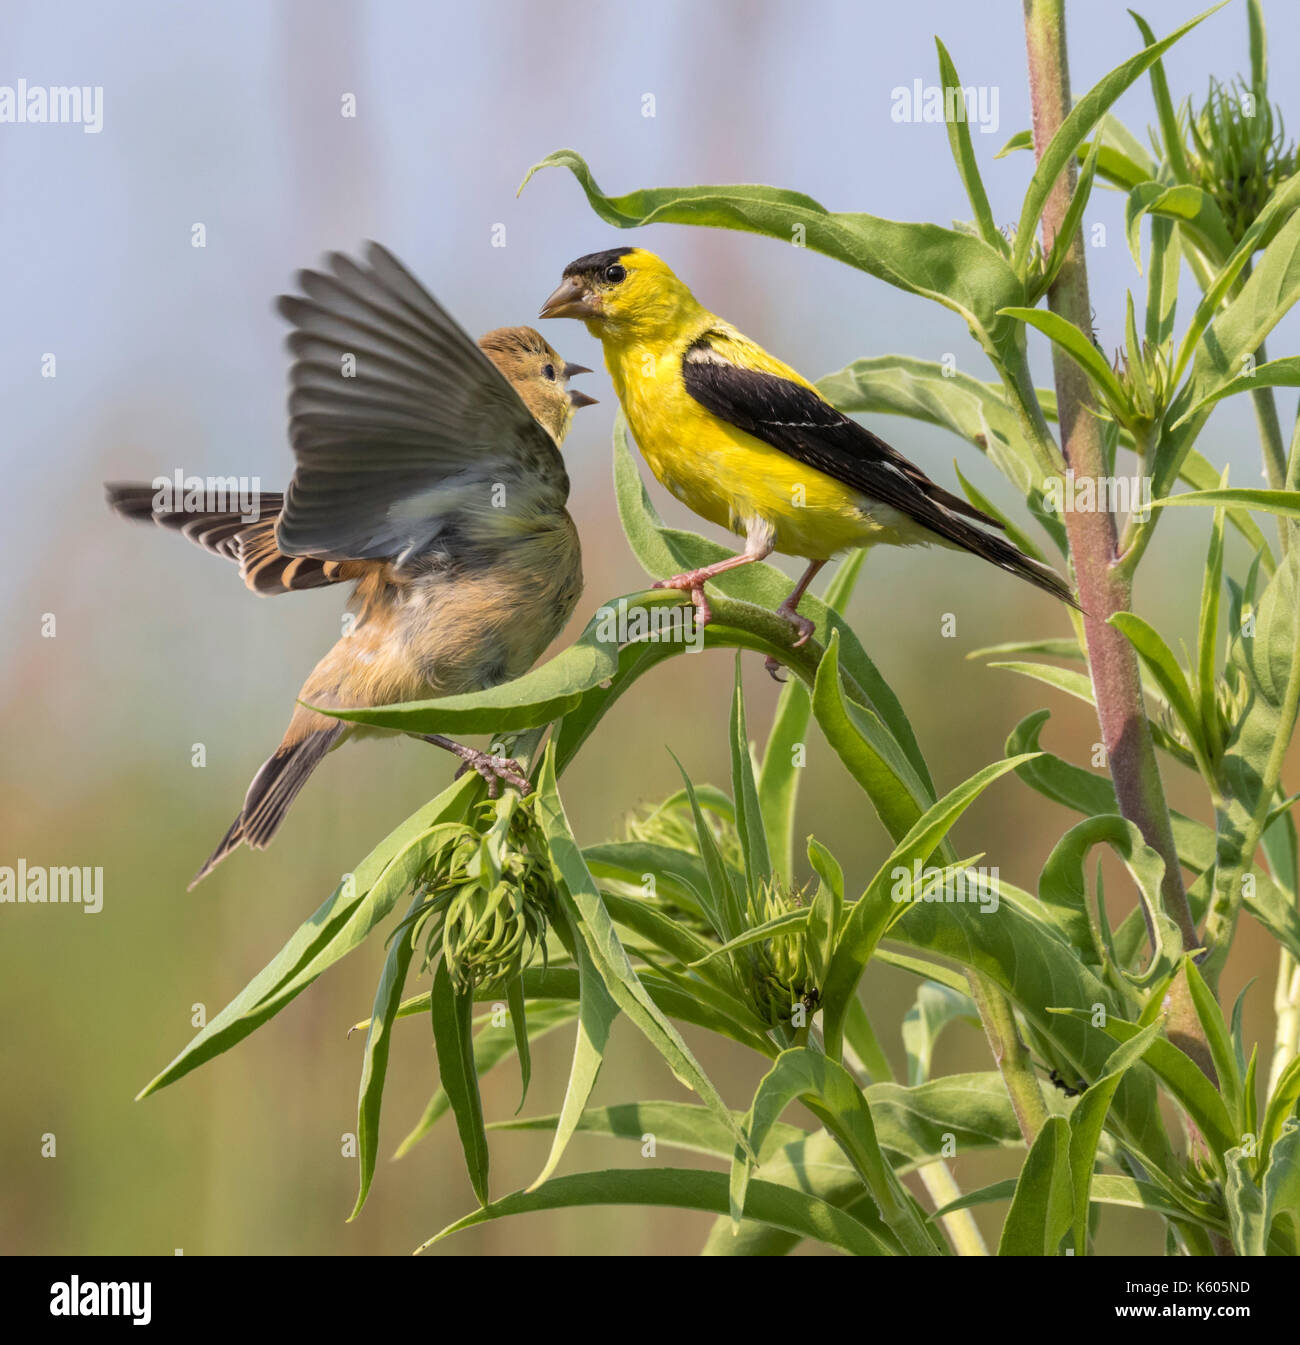 Male American goldfinch (Spinus tristis) with a fledgling begging for food, Ames, Iowa, USA Stock Photo